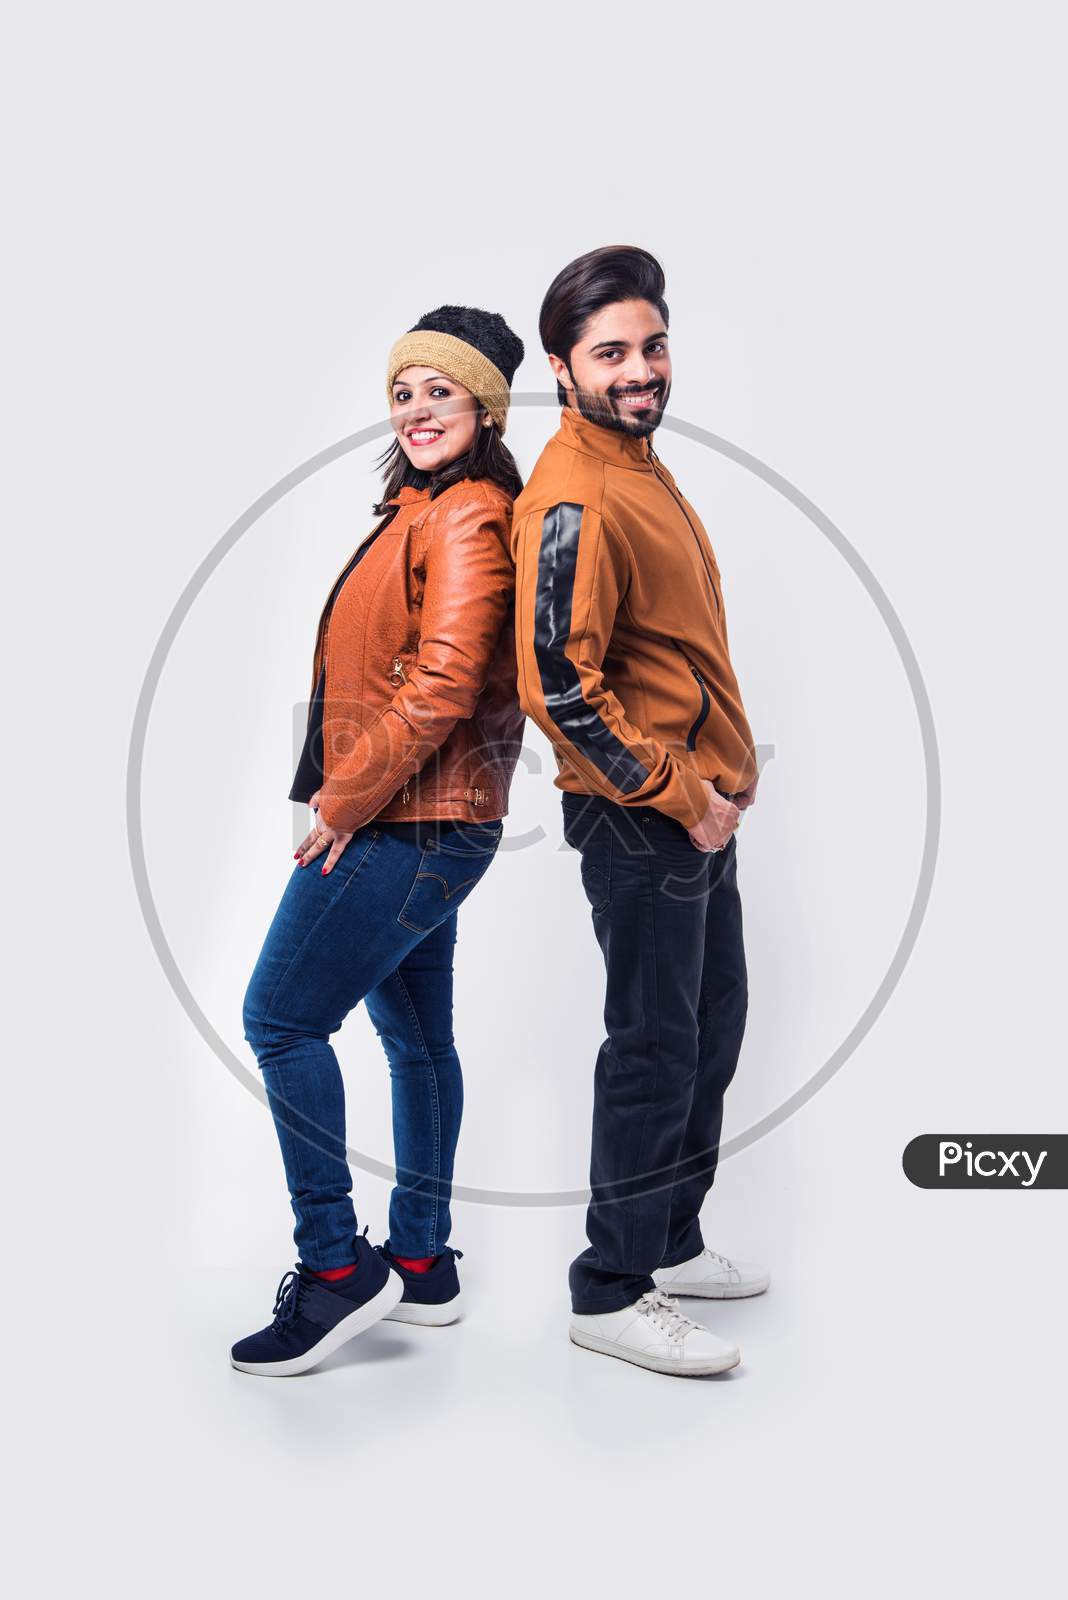 Indian young couple in winter wear /warm clothes against white background